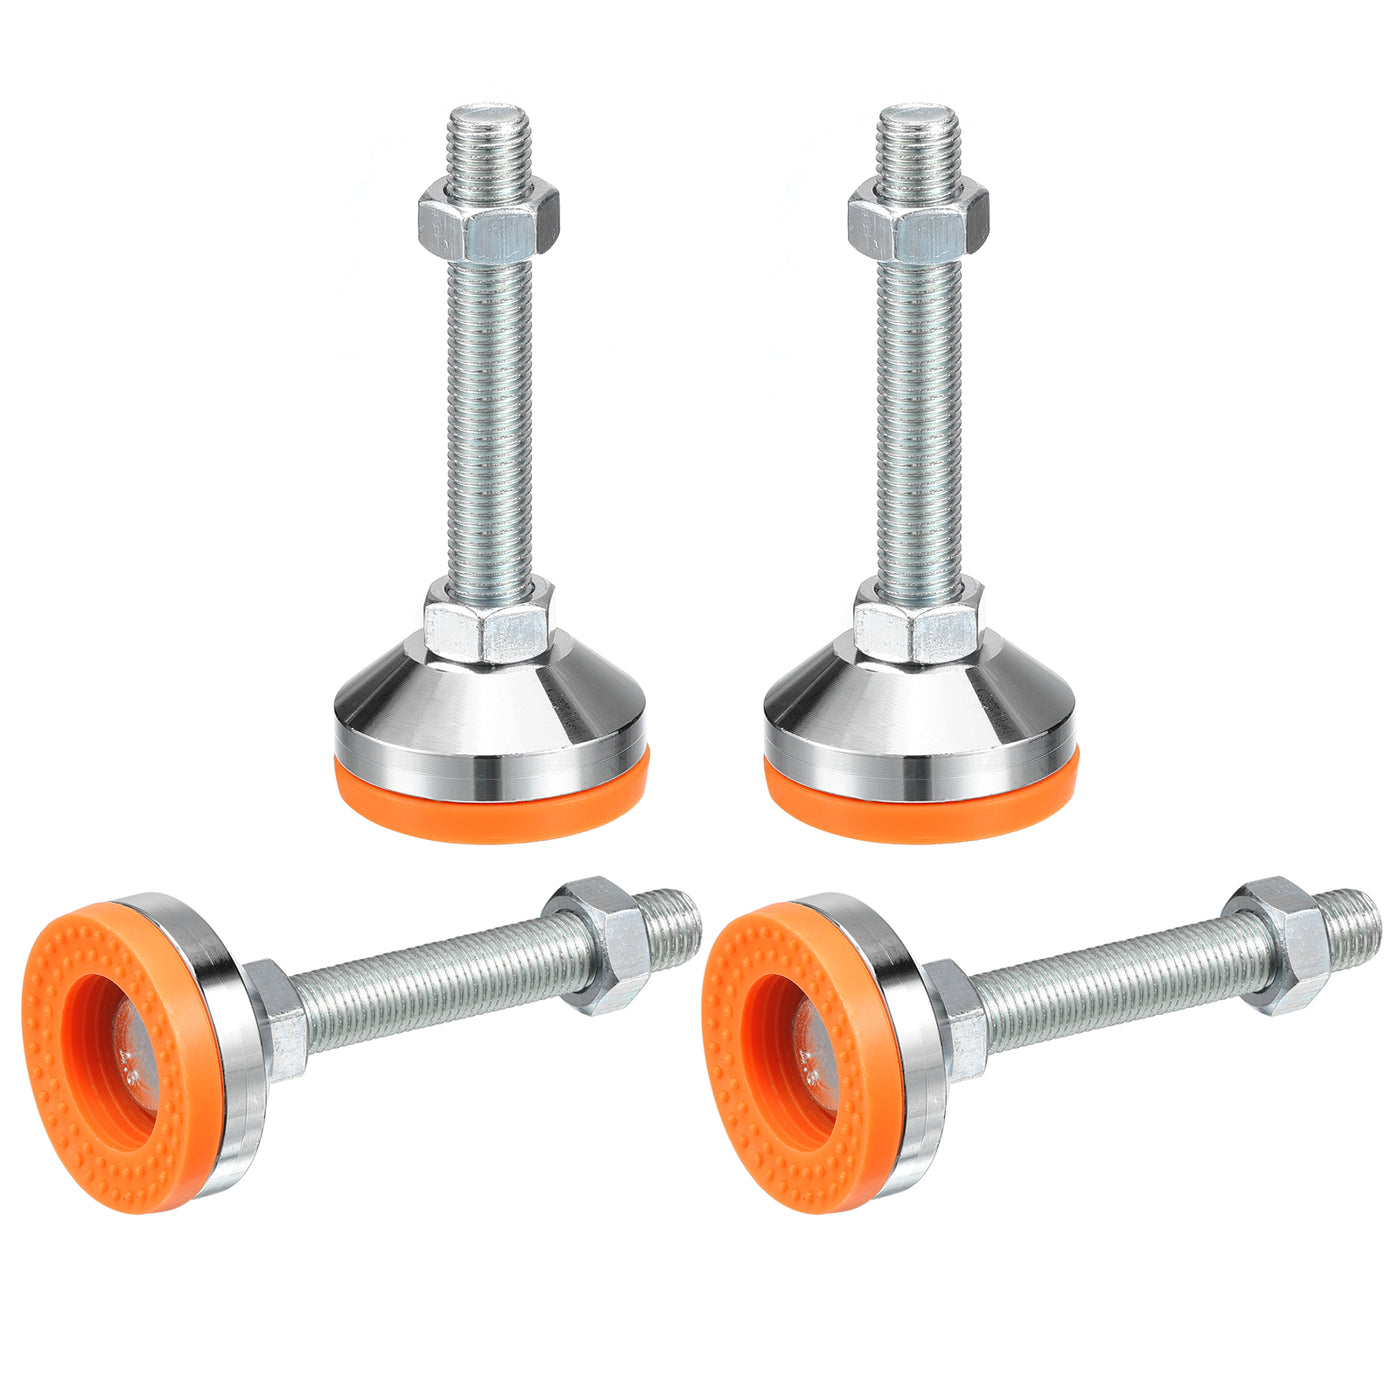 uxcell Uxcell Leveling Feet, 4Pcs M16x100x60mm - Carbon Steel Non-Skid Anti-shock Adjustable Table Feet, Leveling Screw Leg for Furniture Workshops Equipment